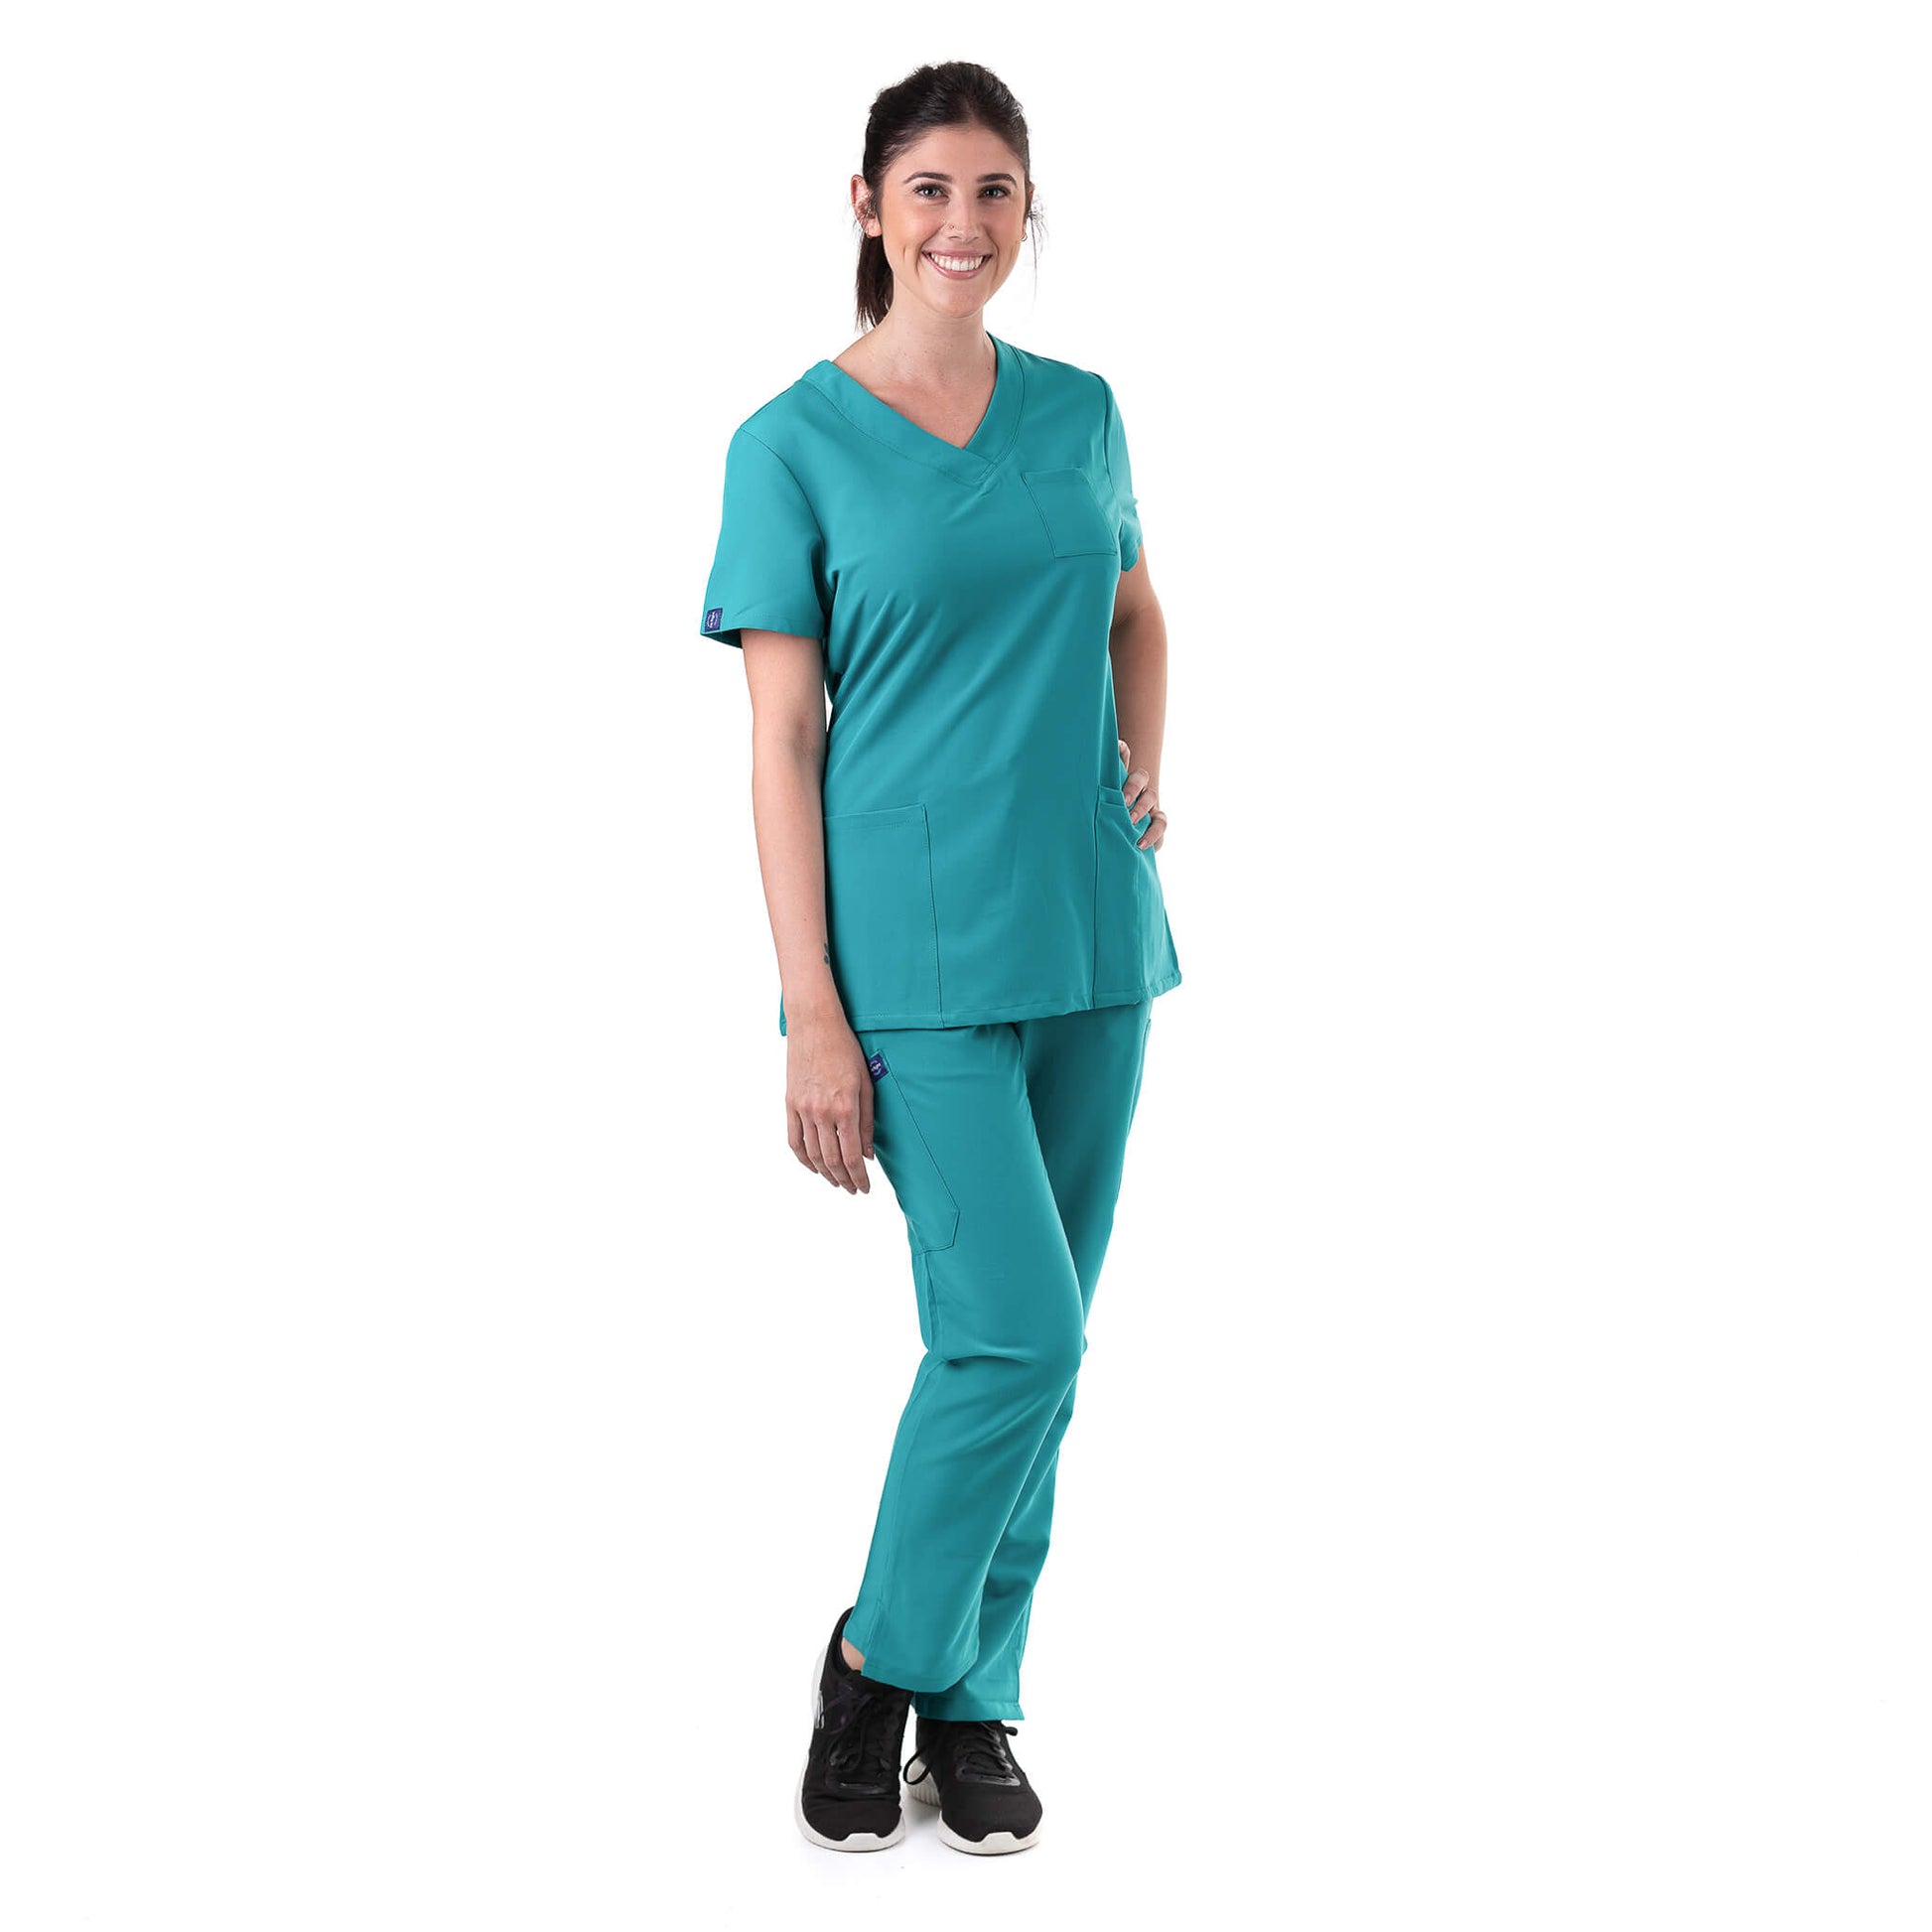 Nurse wearing Teal Medical Scrub Set from Fit Right Medical Scrubs